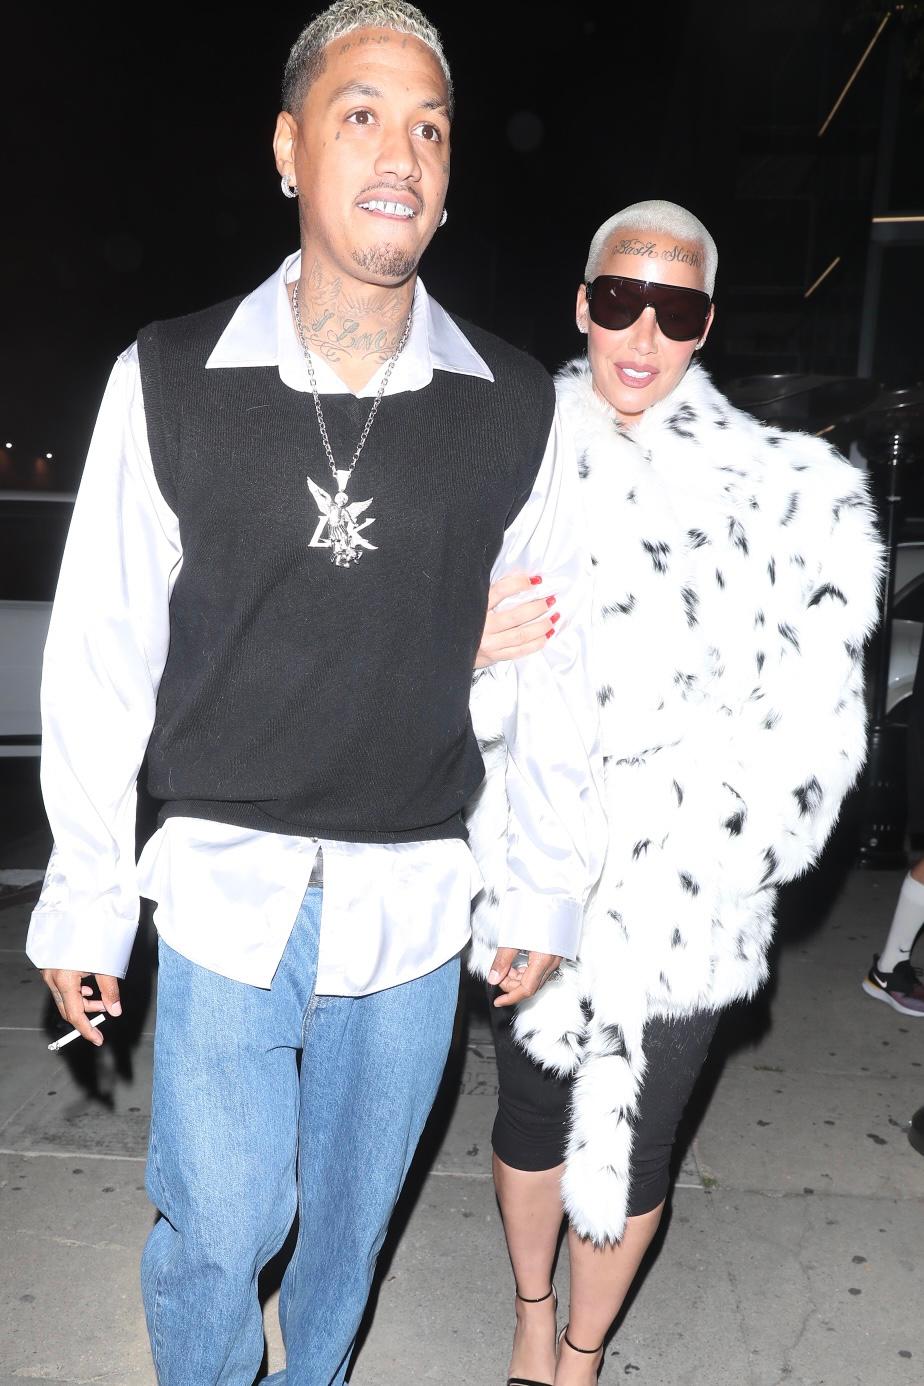 Amber Rose DUMPS Boyfriend On Instagram, Accuses Him Of Cheating With 12 Women!